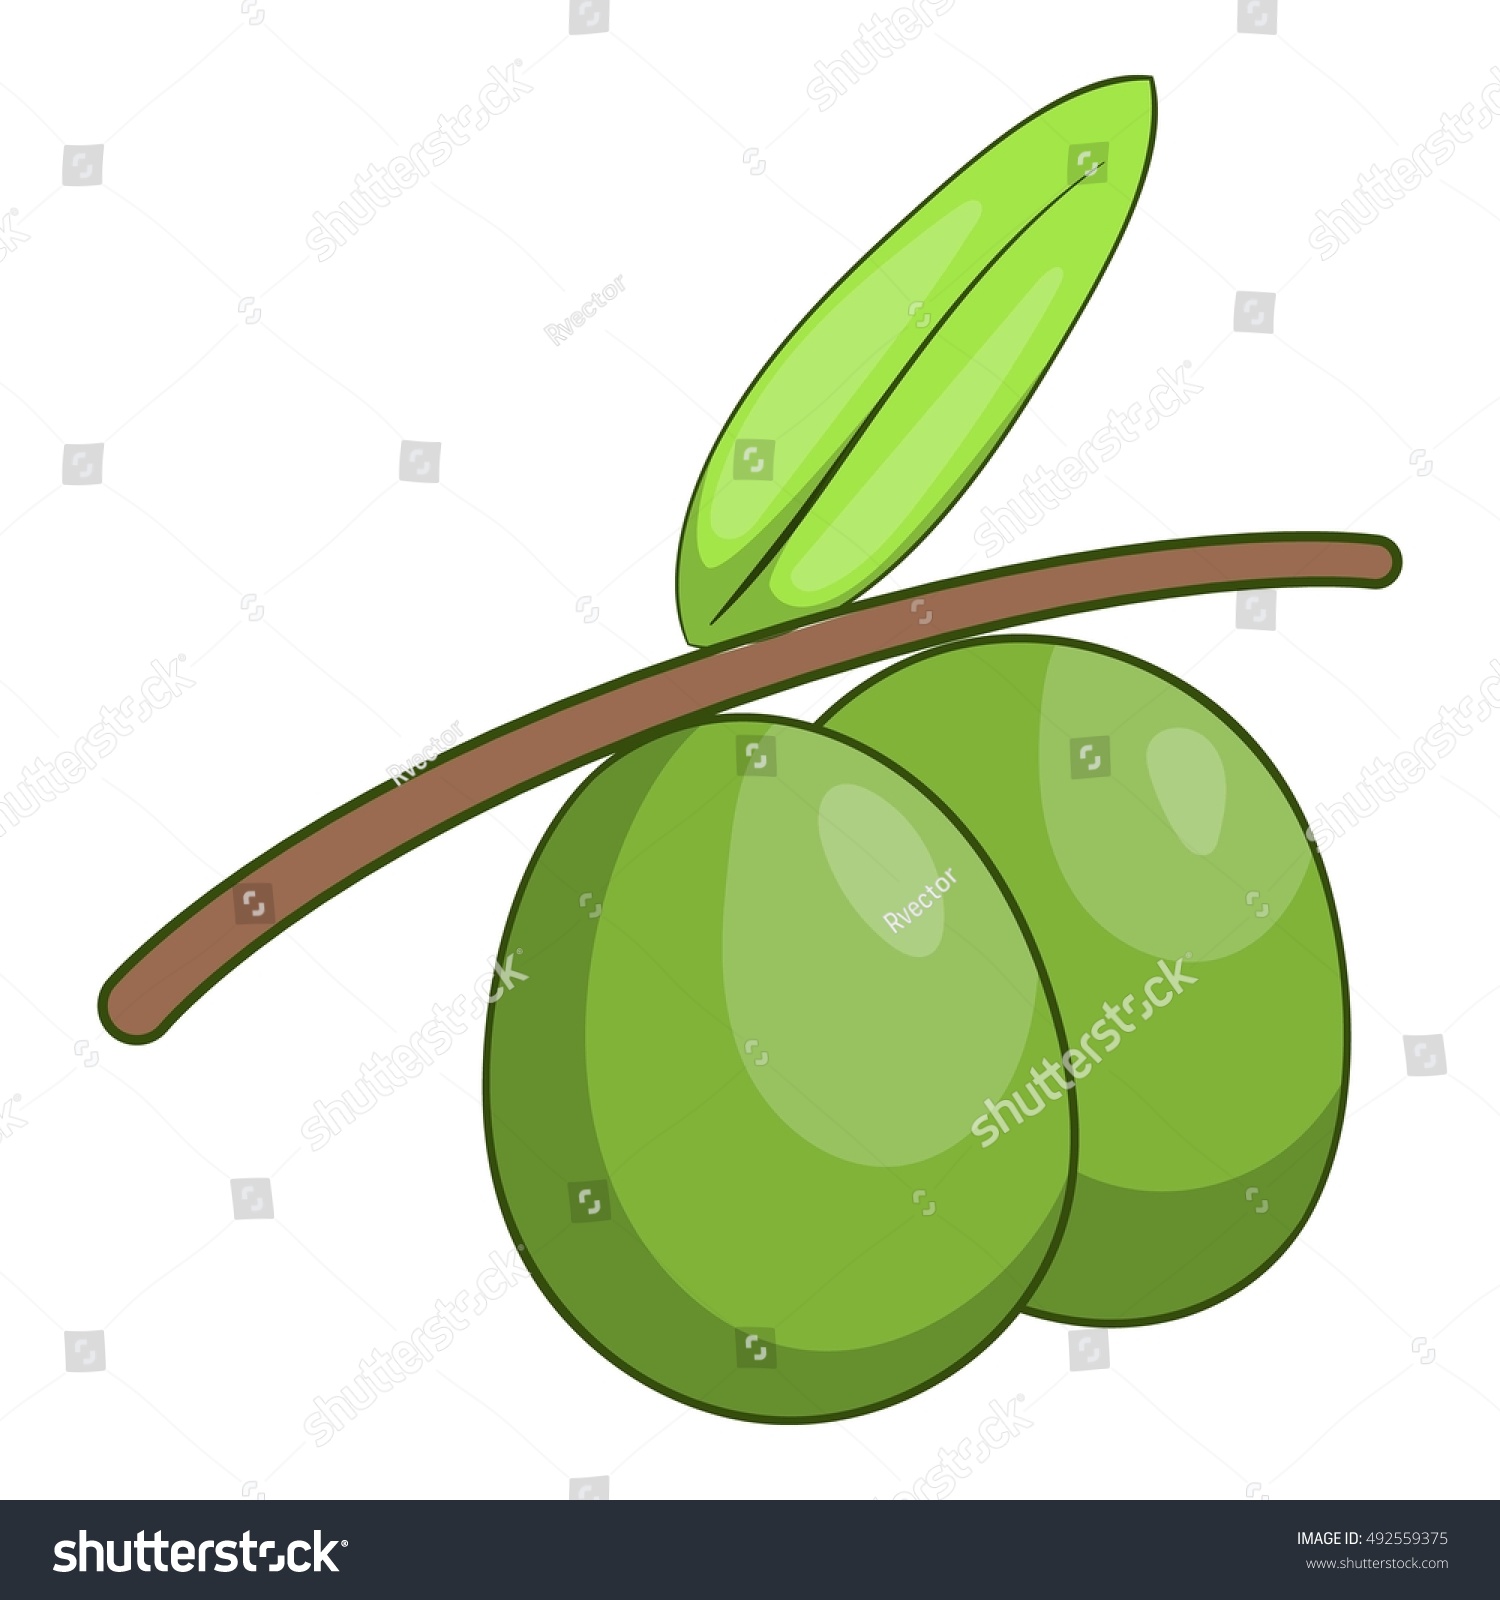 Olive Branch Green Olives Icon Cartoon Stock Vector Royalty Free 492559375 Shutterstock 